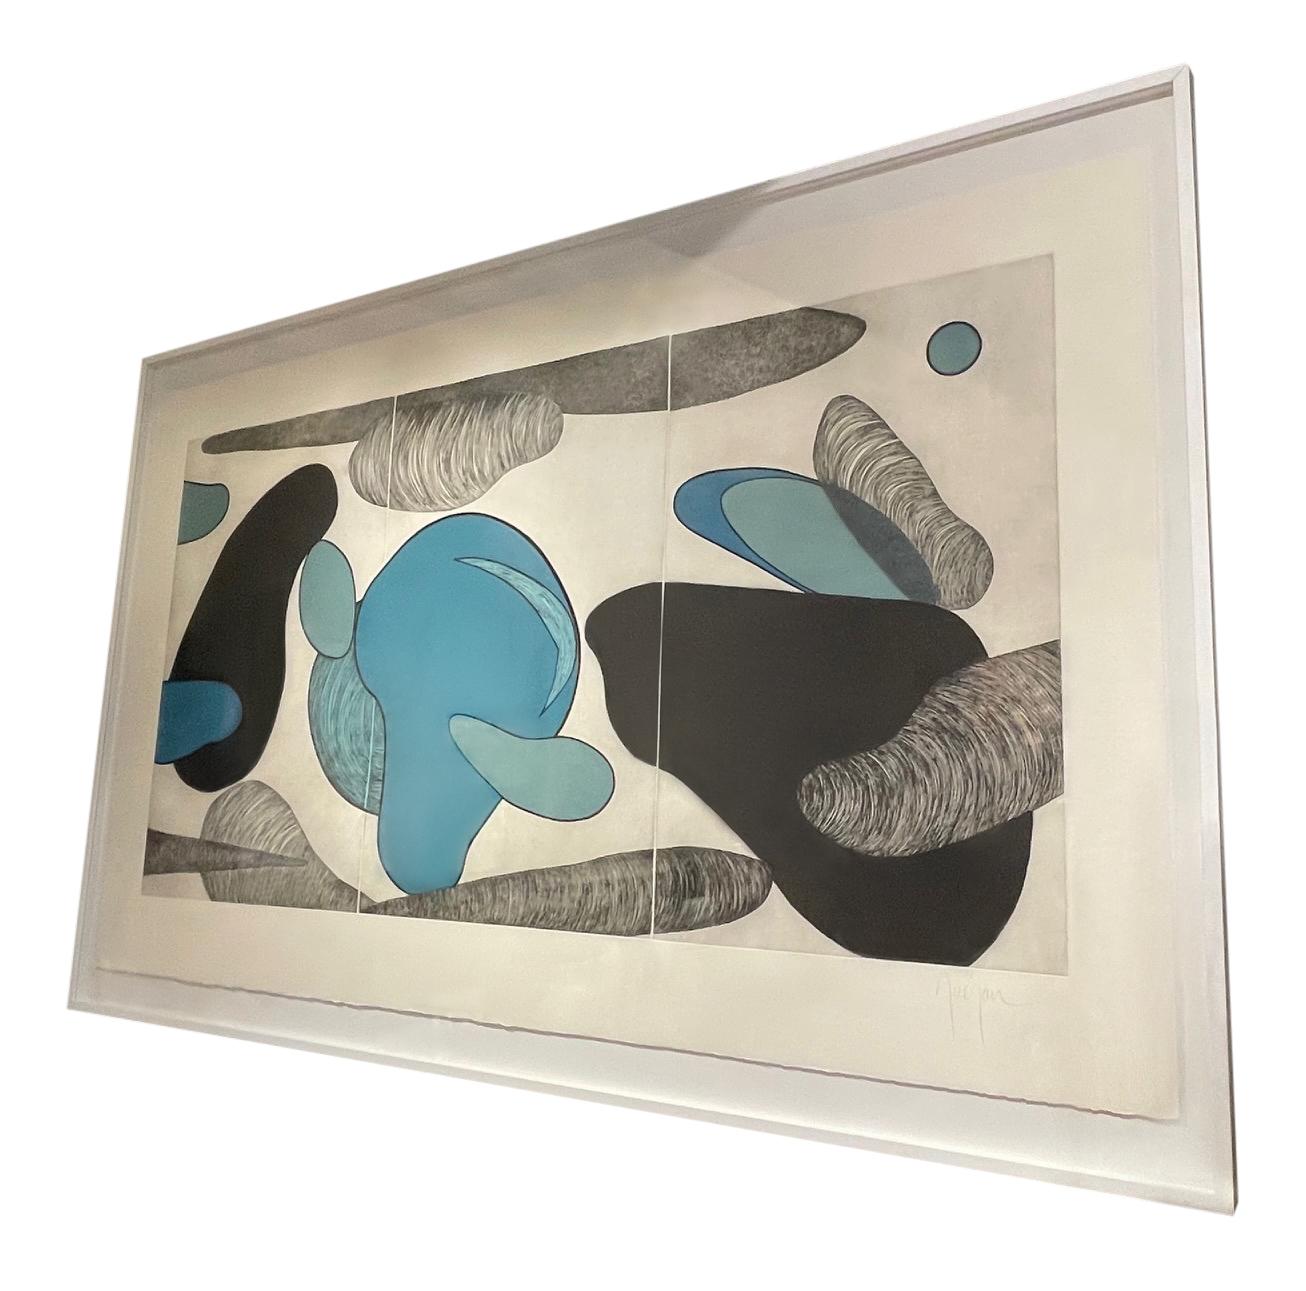 Contemporary French artist Marielle Guegan EXTRA EXTRA large triptych.
Combination of painting and engraving.
White frame with acrylic surface.